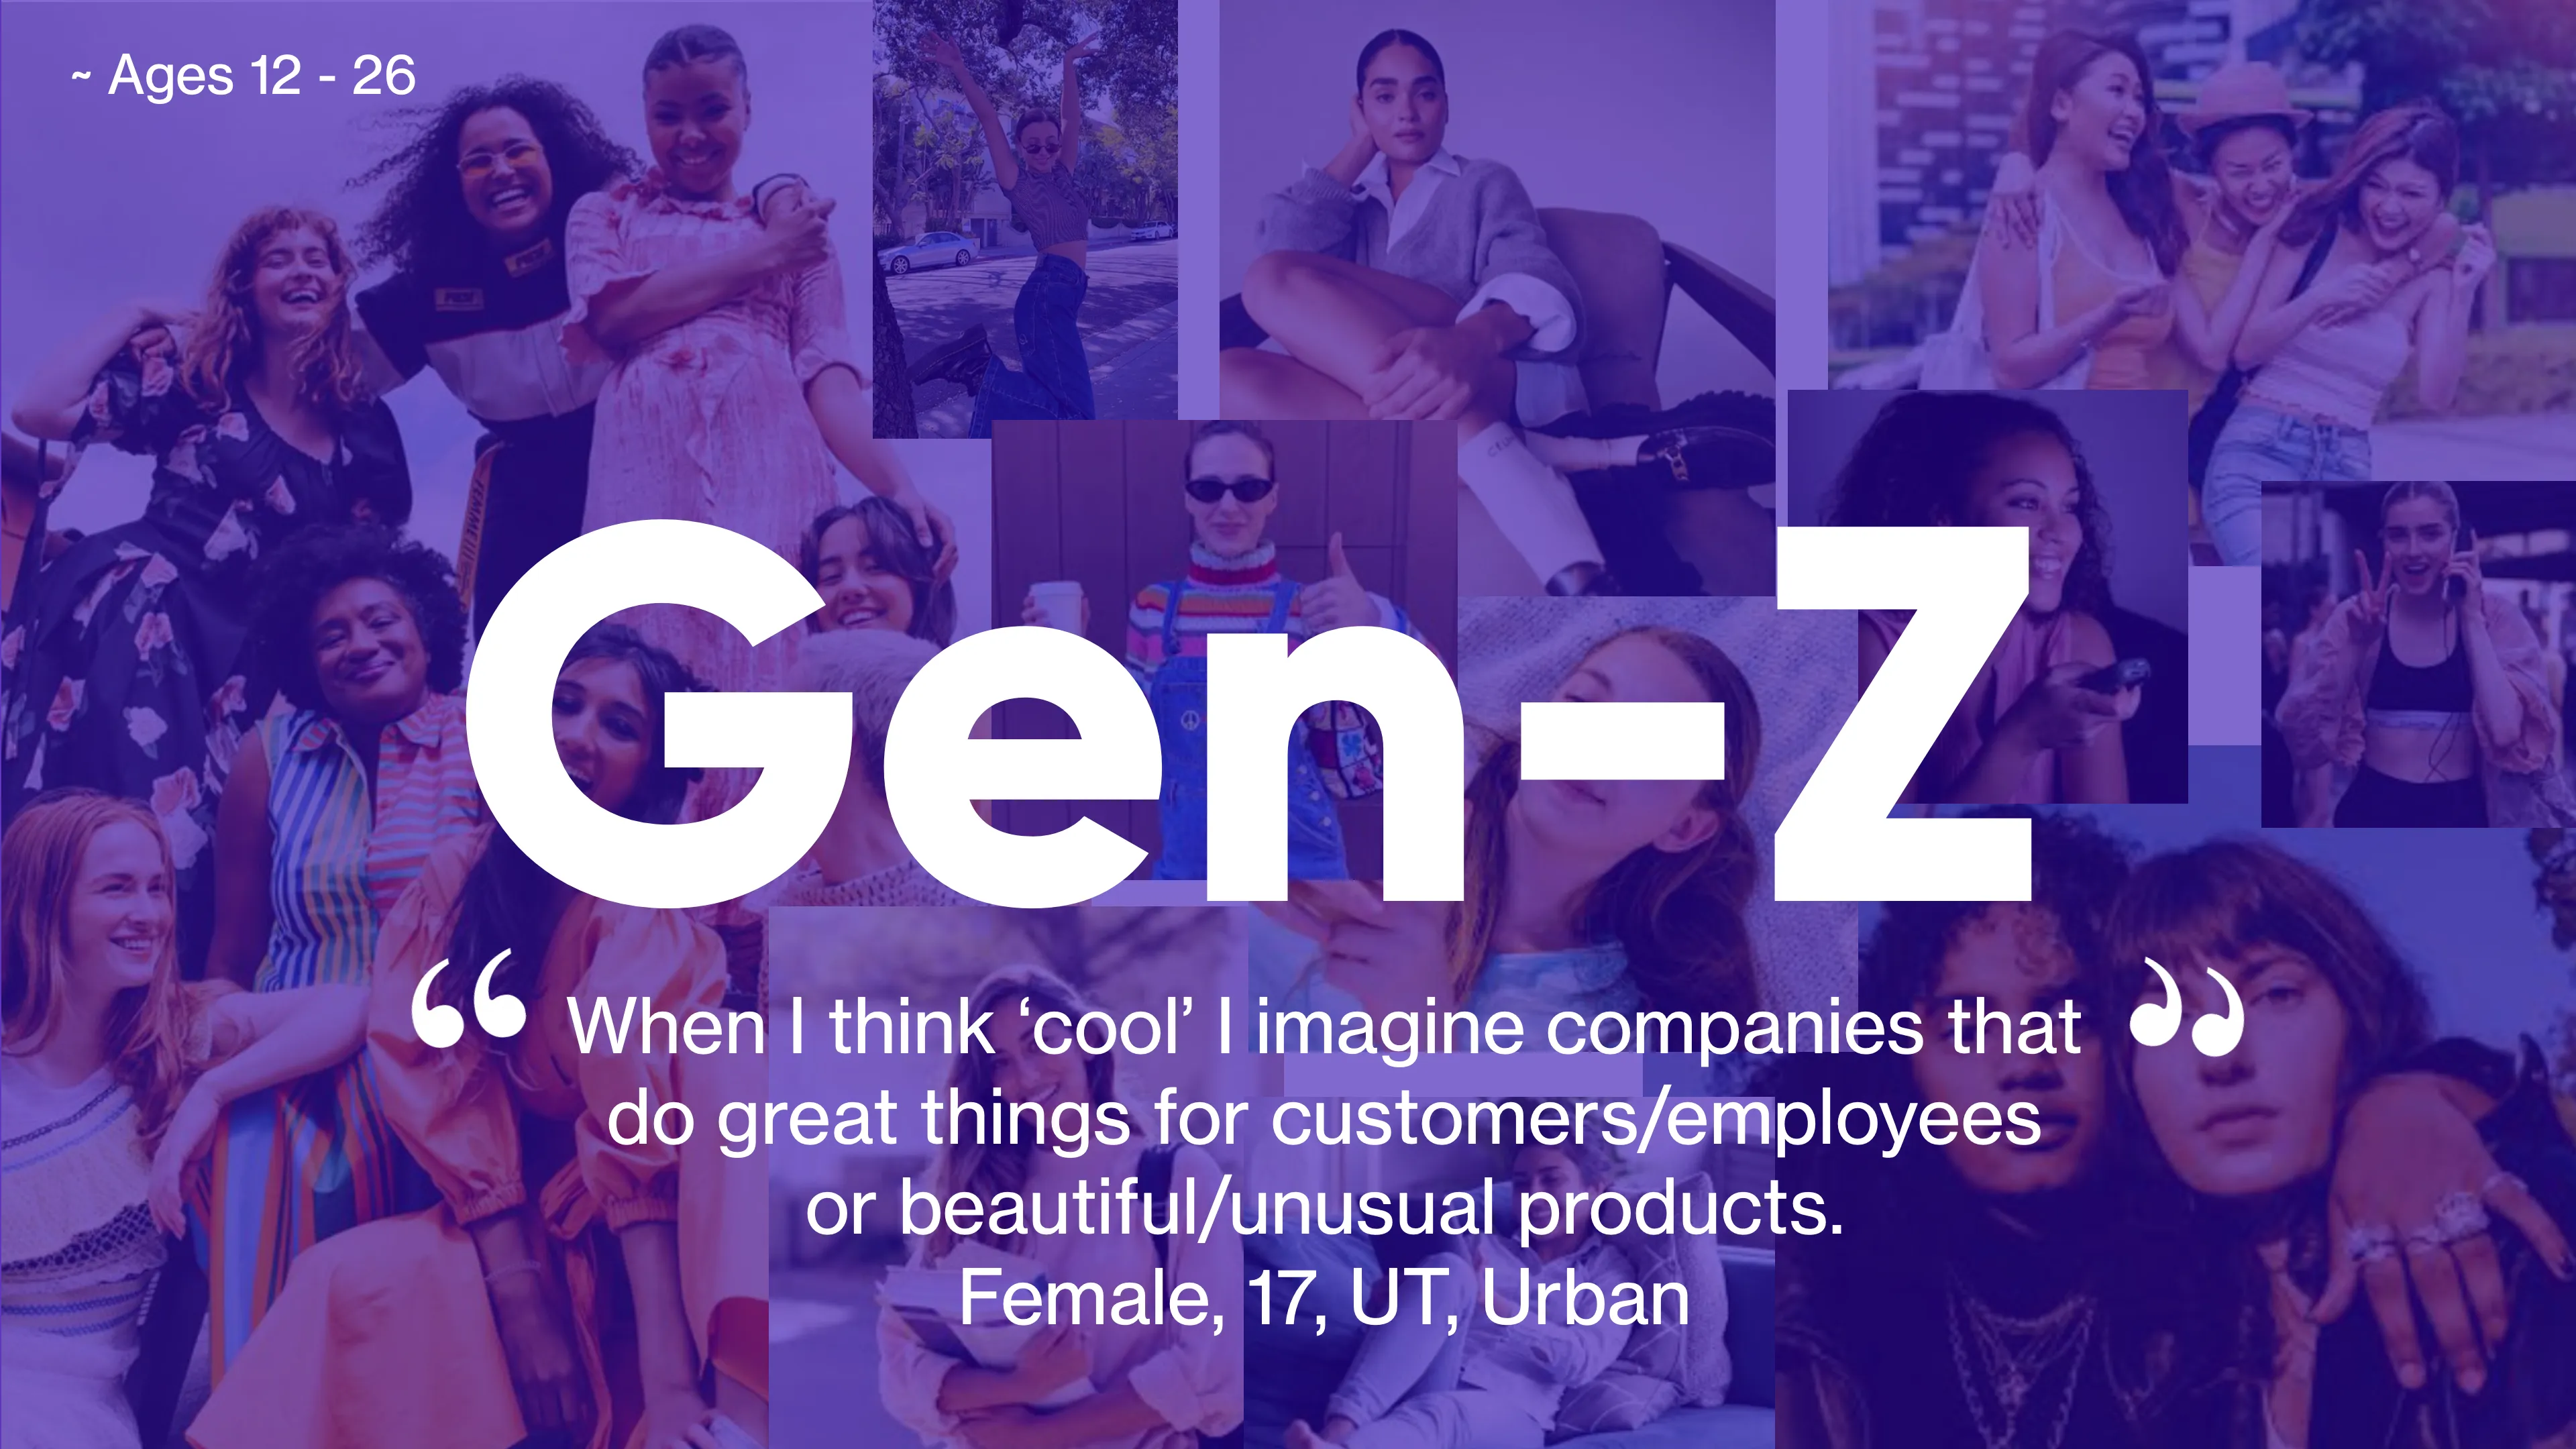 Slide 8, showing a collage of Gen-Z as the background with a summary quote on top.